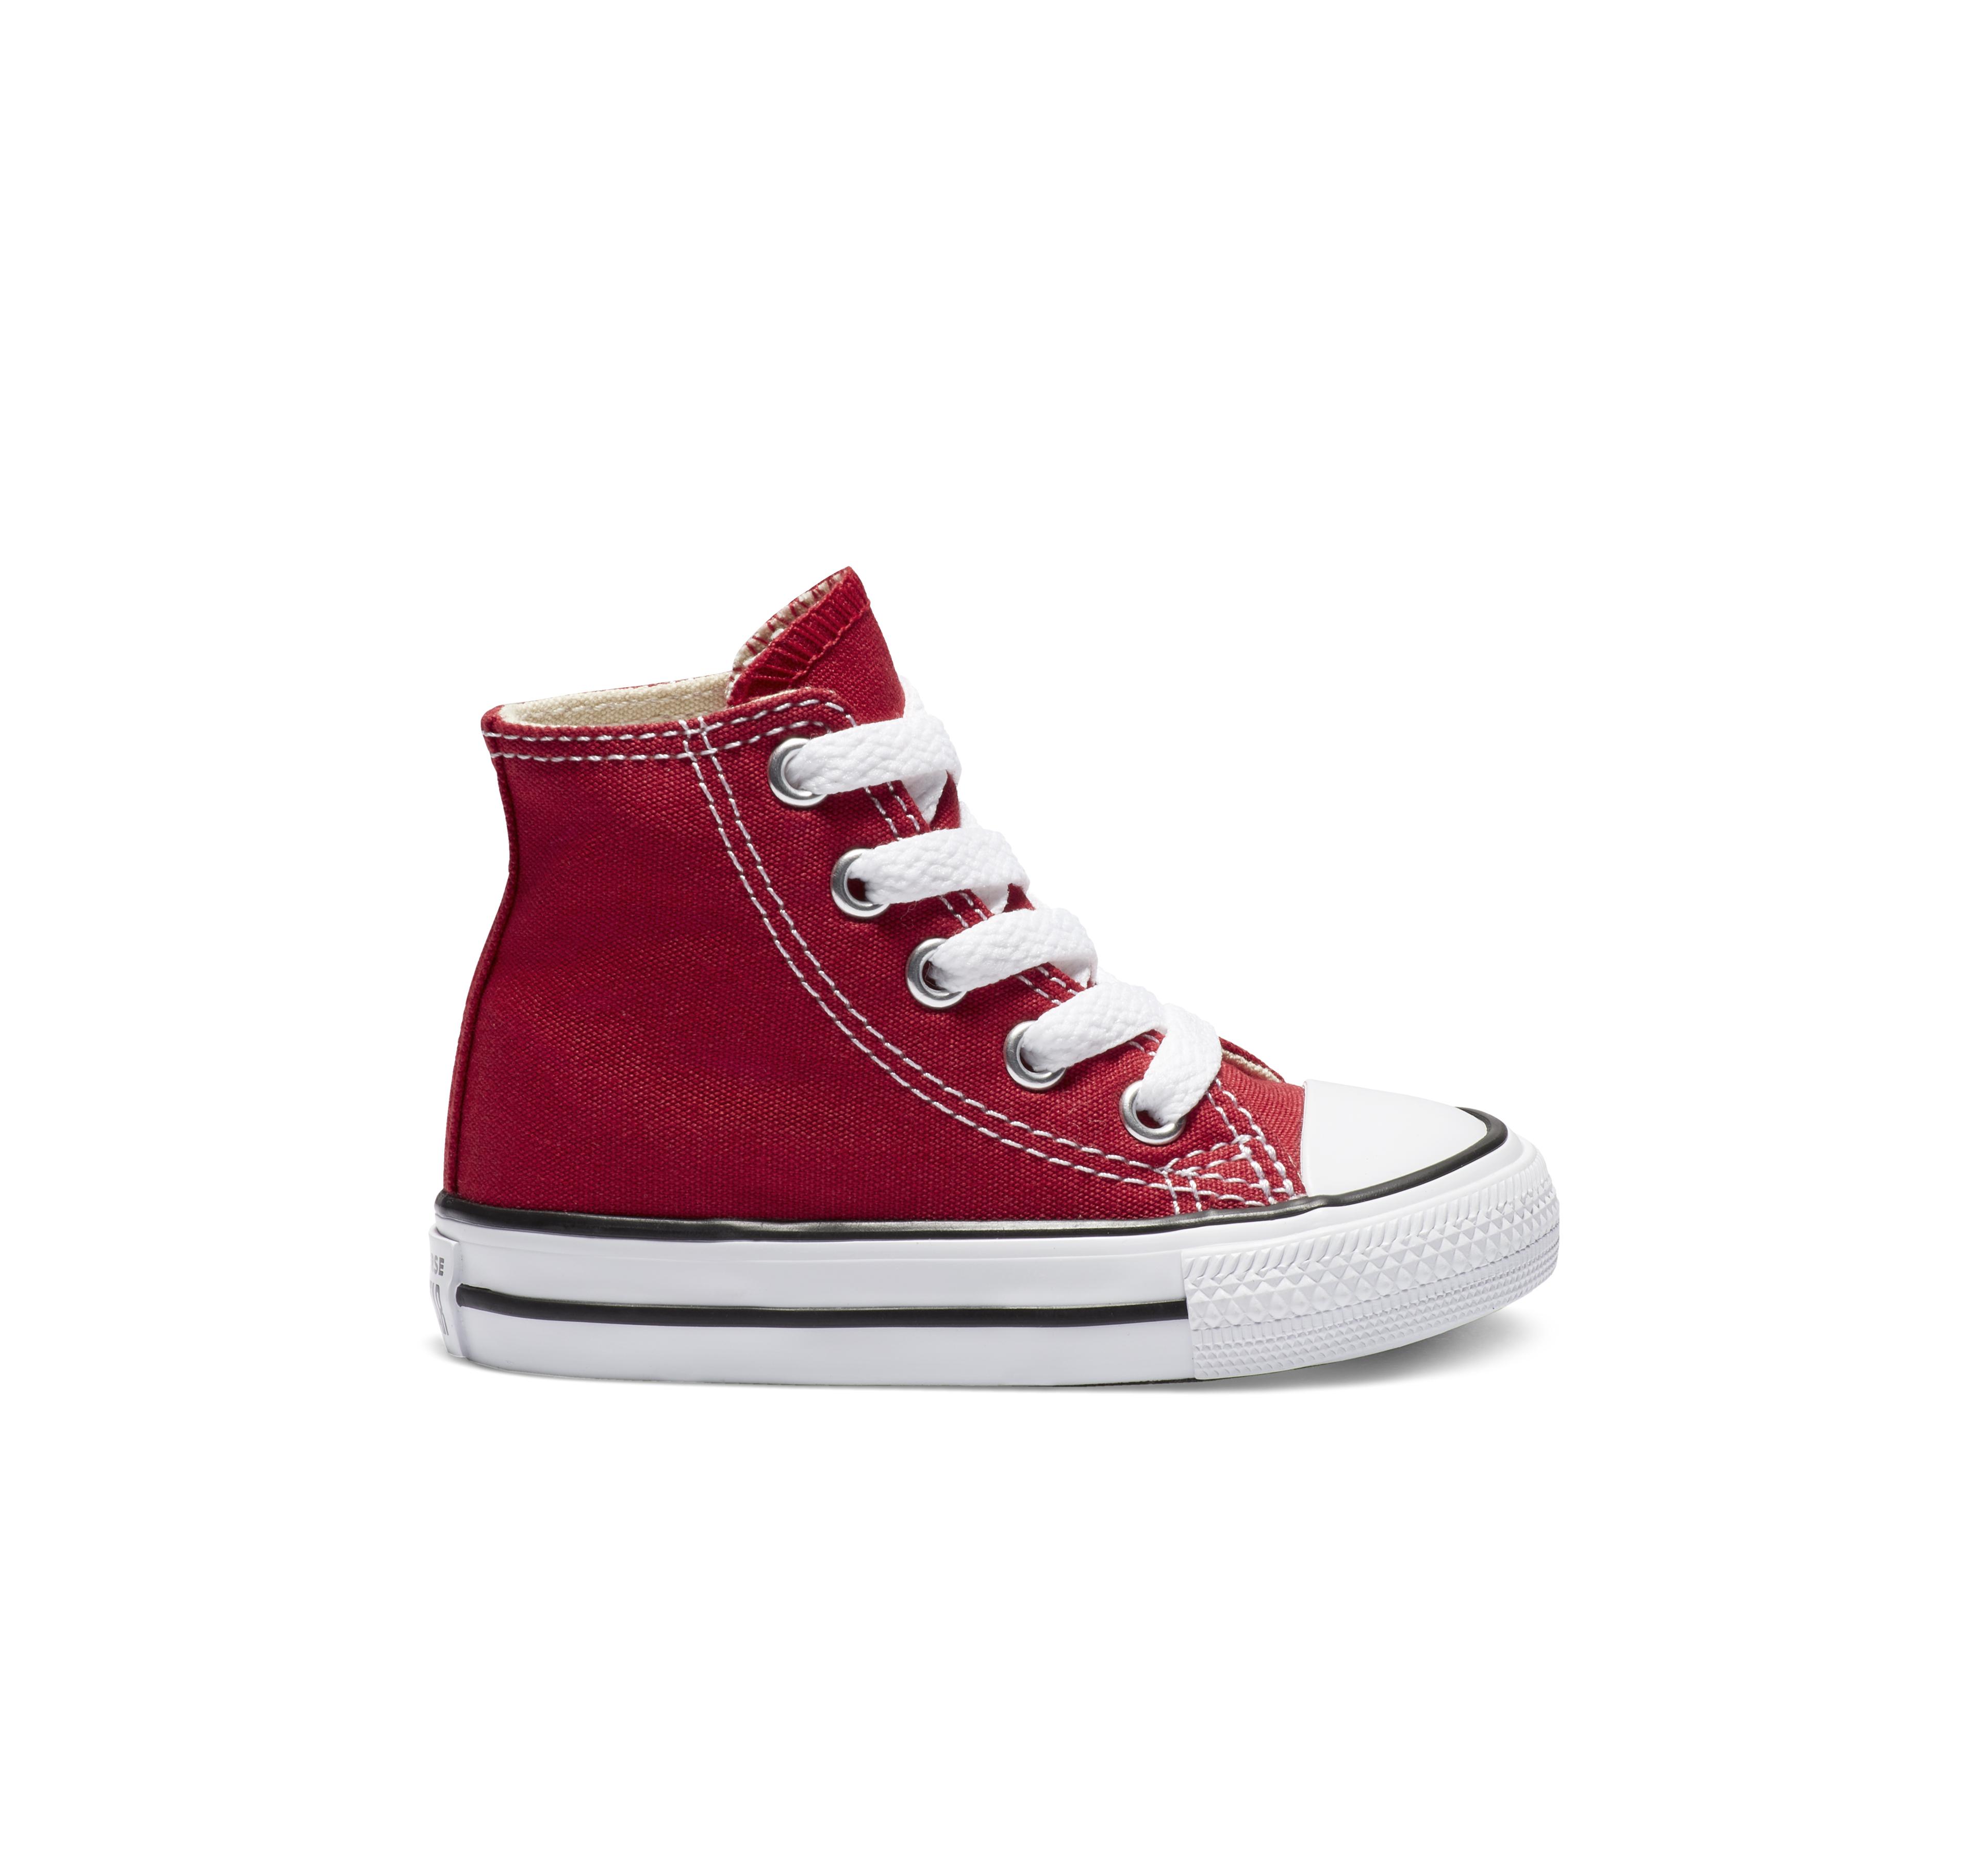 Converse Canvas Chuck Taylor All Star High Top in Red for Men - Lyst